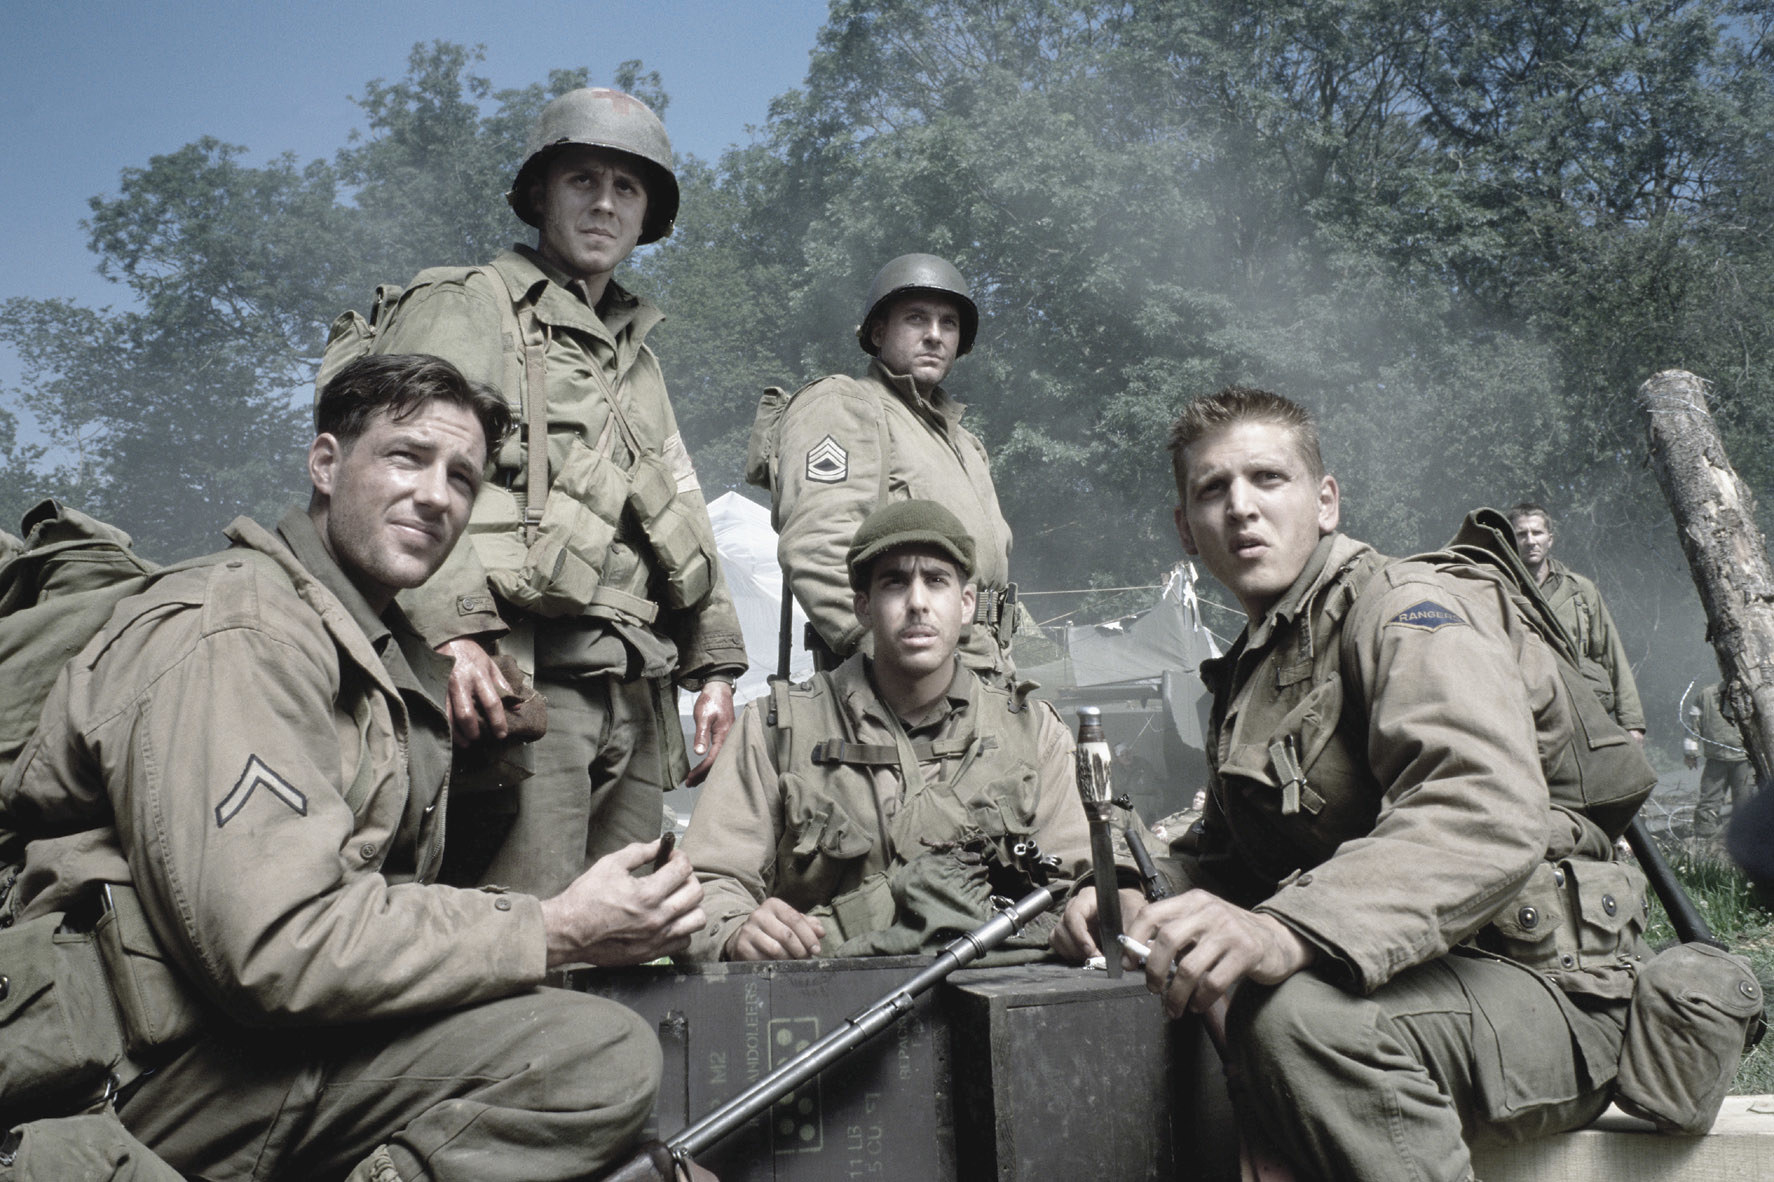 The soldiers sitting together in the film